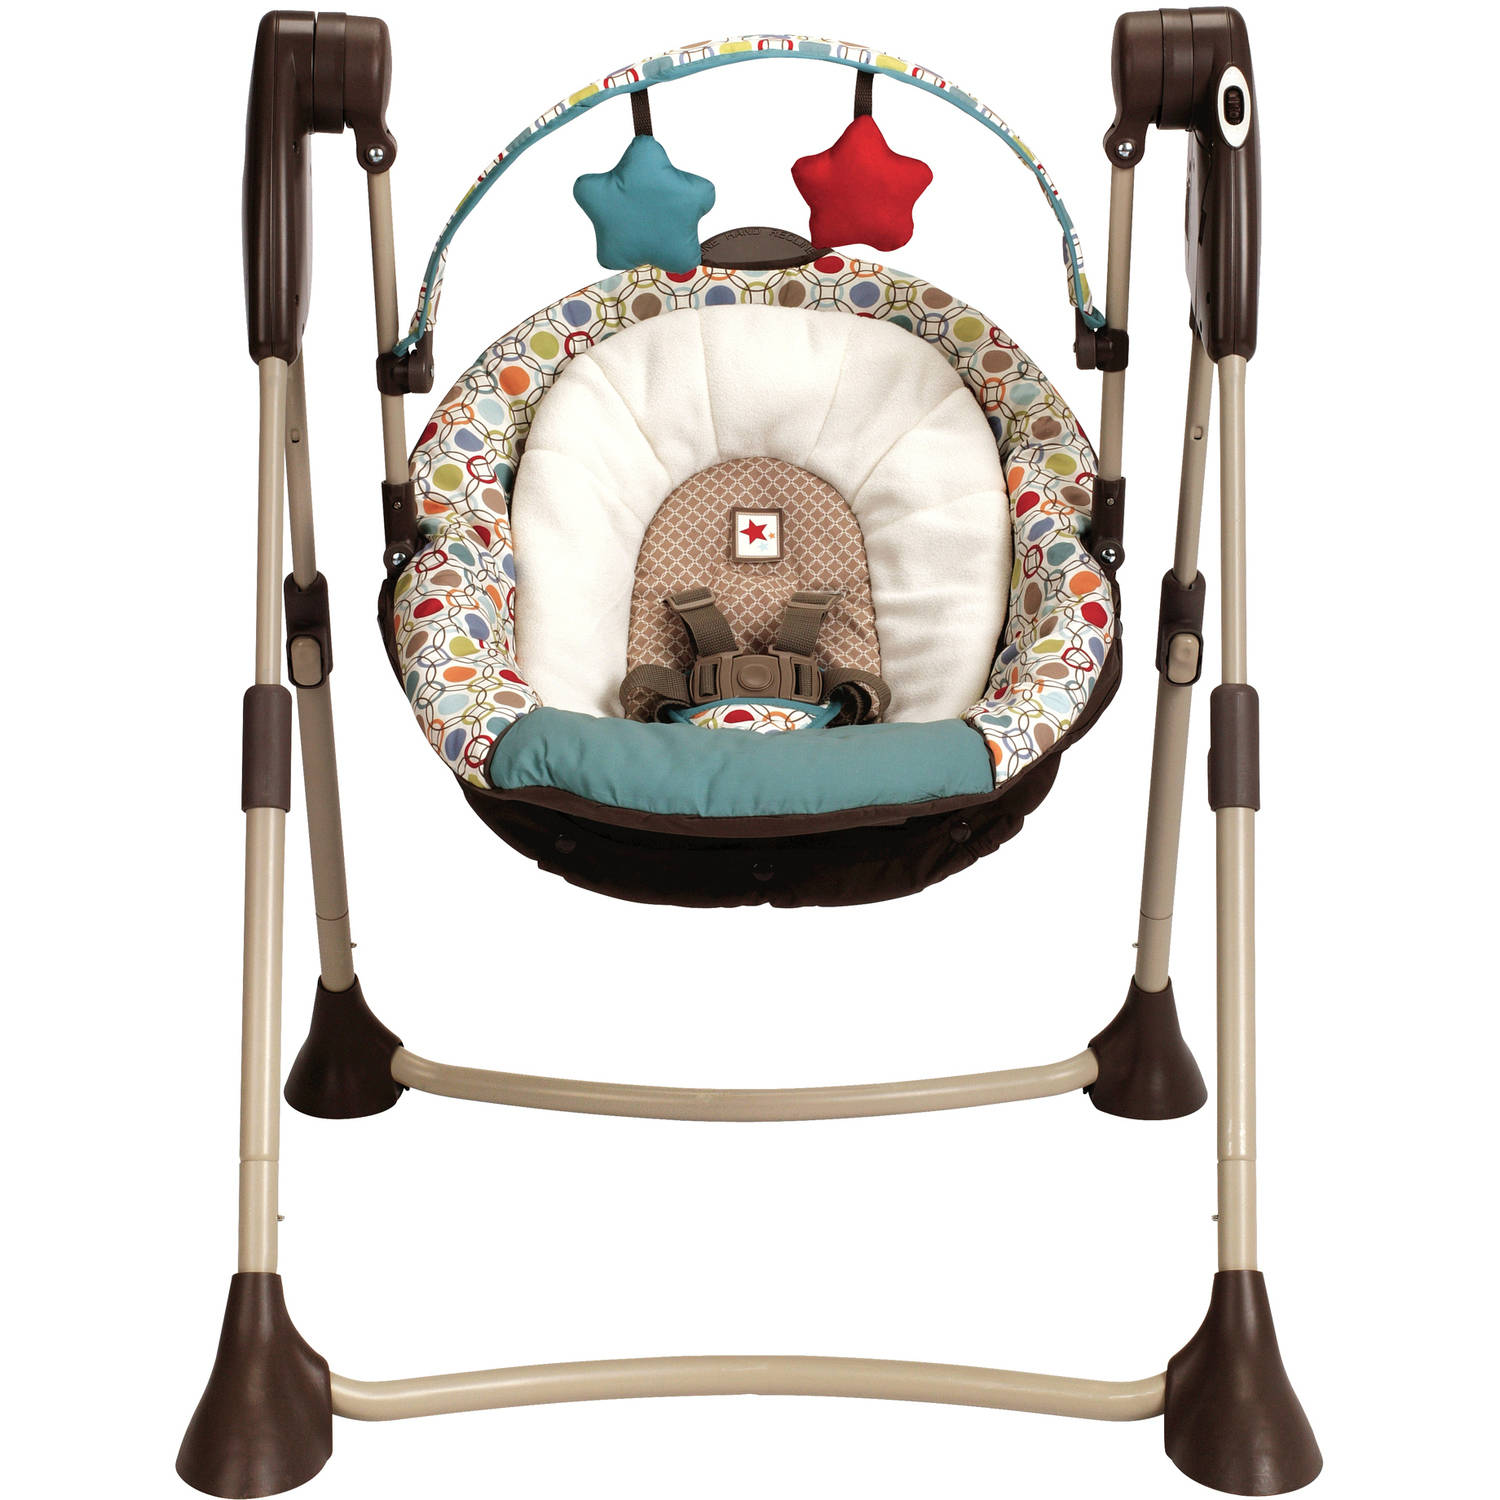 Graco Swing By Me Twister - image 4 of 6